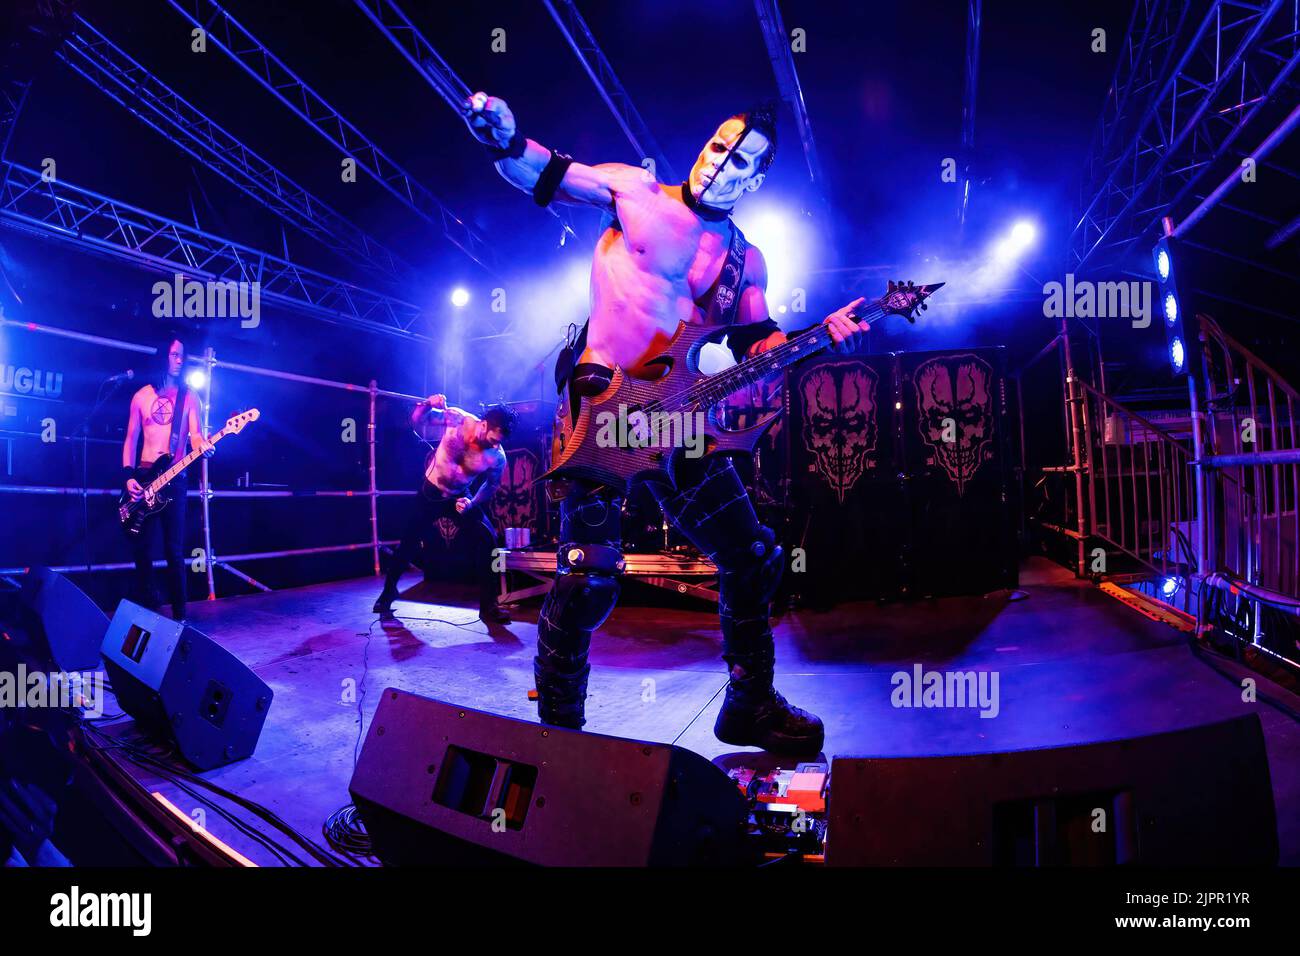 Milano, Italy. 19th Aug, 2022. Doyle Wolfgang von Frankenstein from Misfits performs live during a concert at Circolo Magnolia. Doyle Wolfgang von Frankenstein, is an American guitarist best known for his material with the horror punk band the Misfits and his own band eponymously named Doyle. (Photo by Mairo Cinquetti/SOPA Images/Sipa USA) Credit: Sipa USA/Alamy Live News Stock Photo